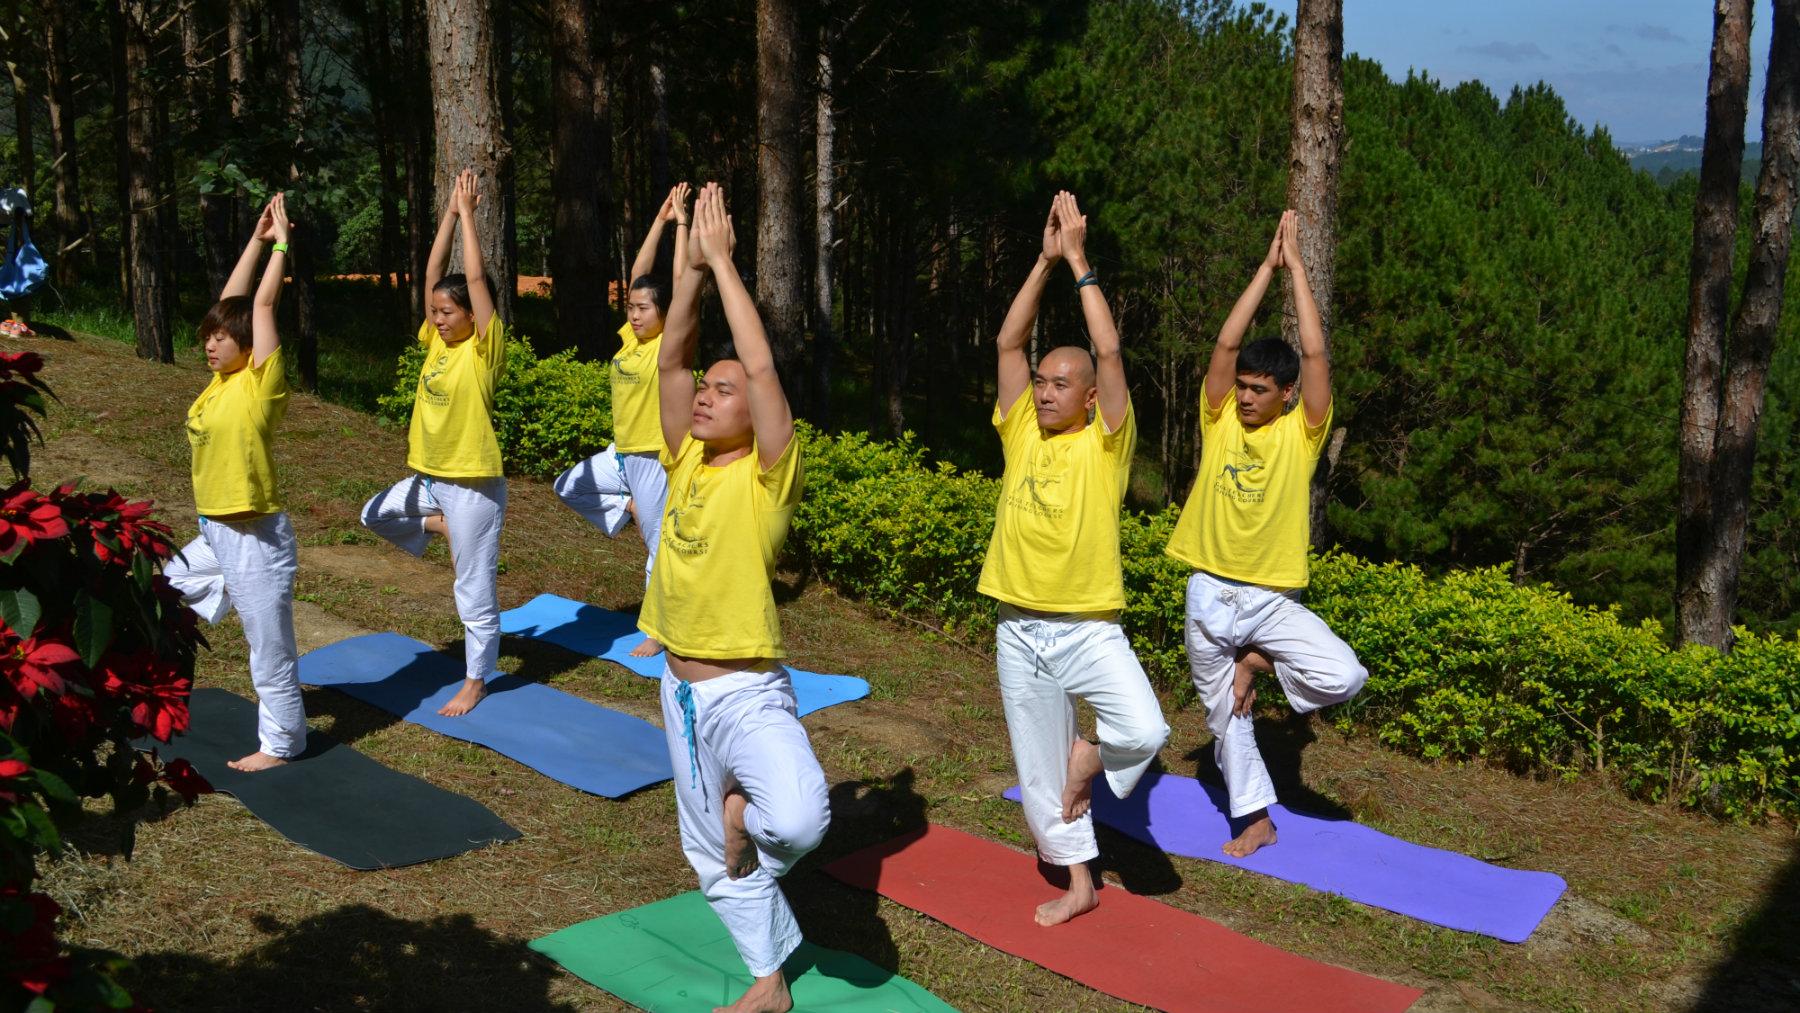 4 students practice Tree Pose by the pond